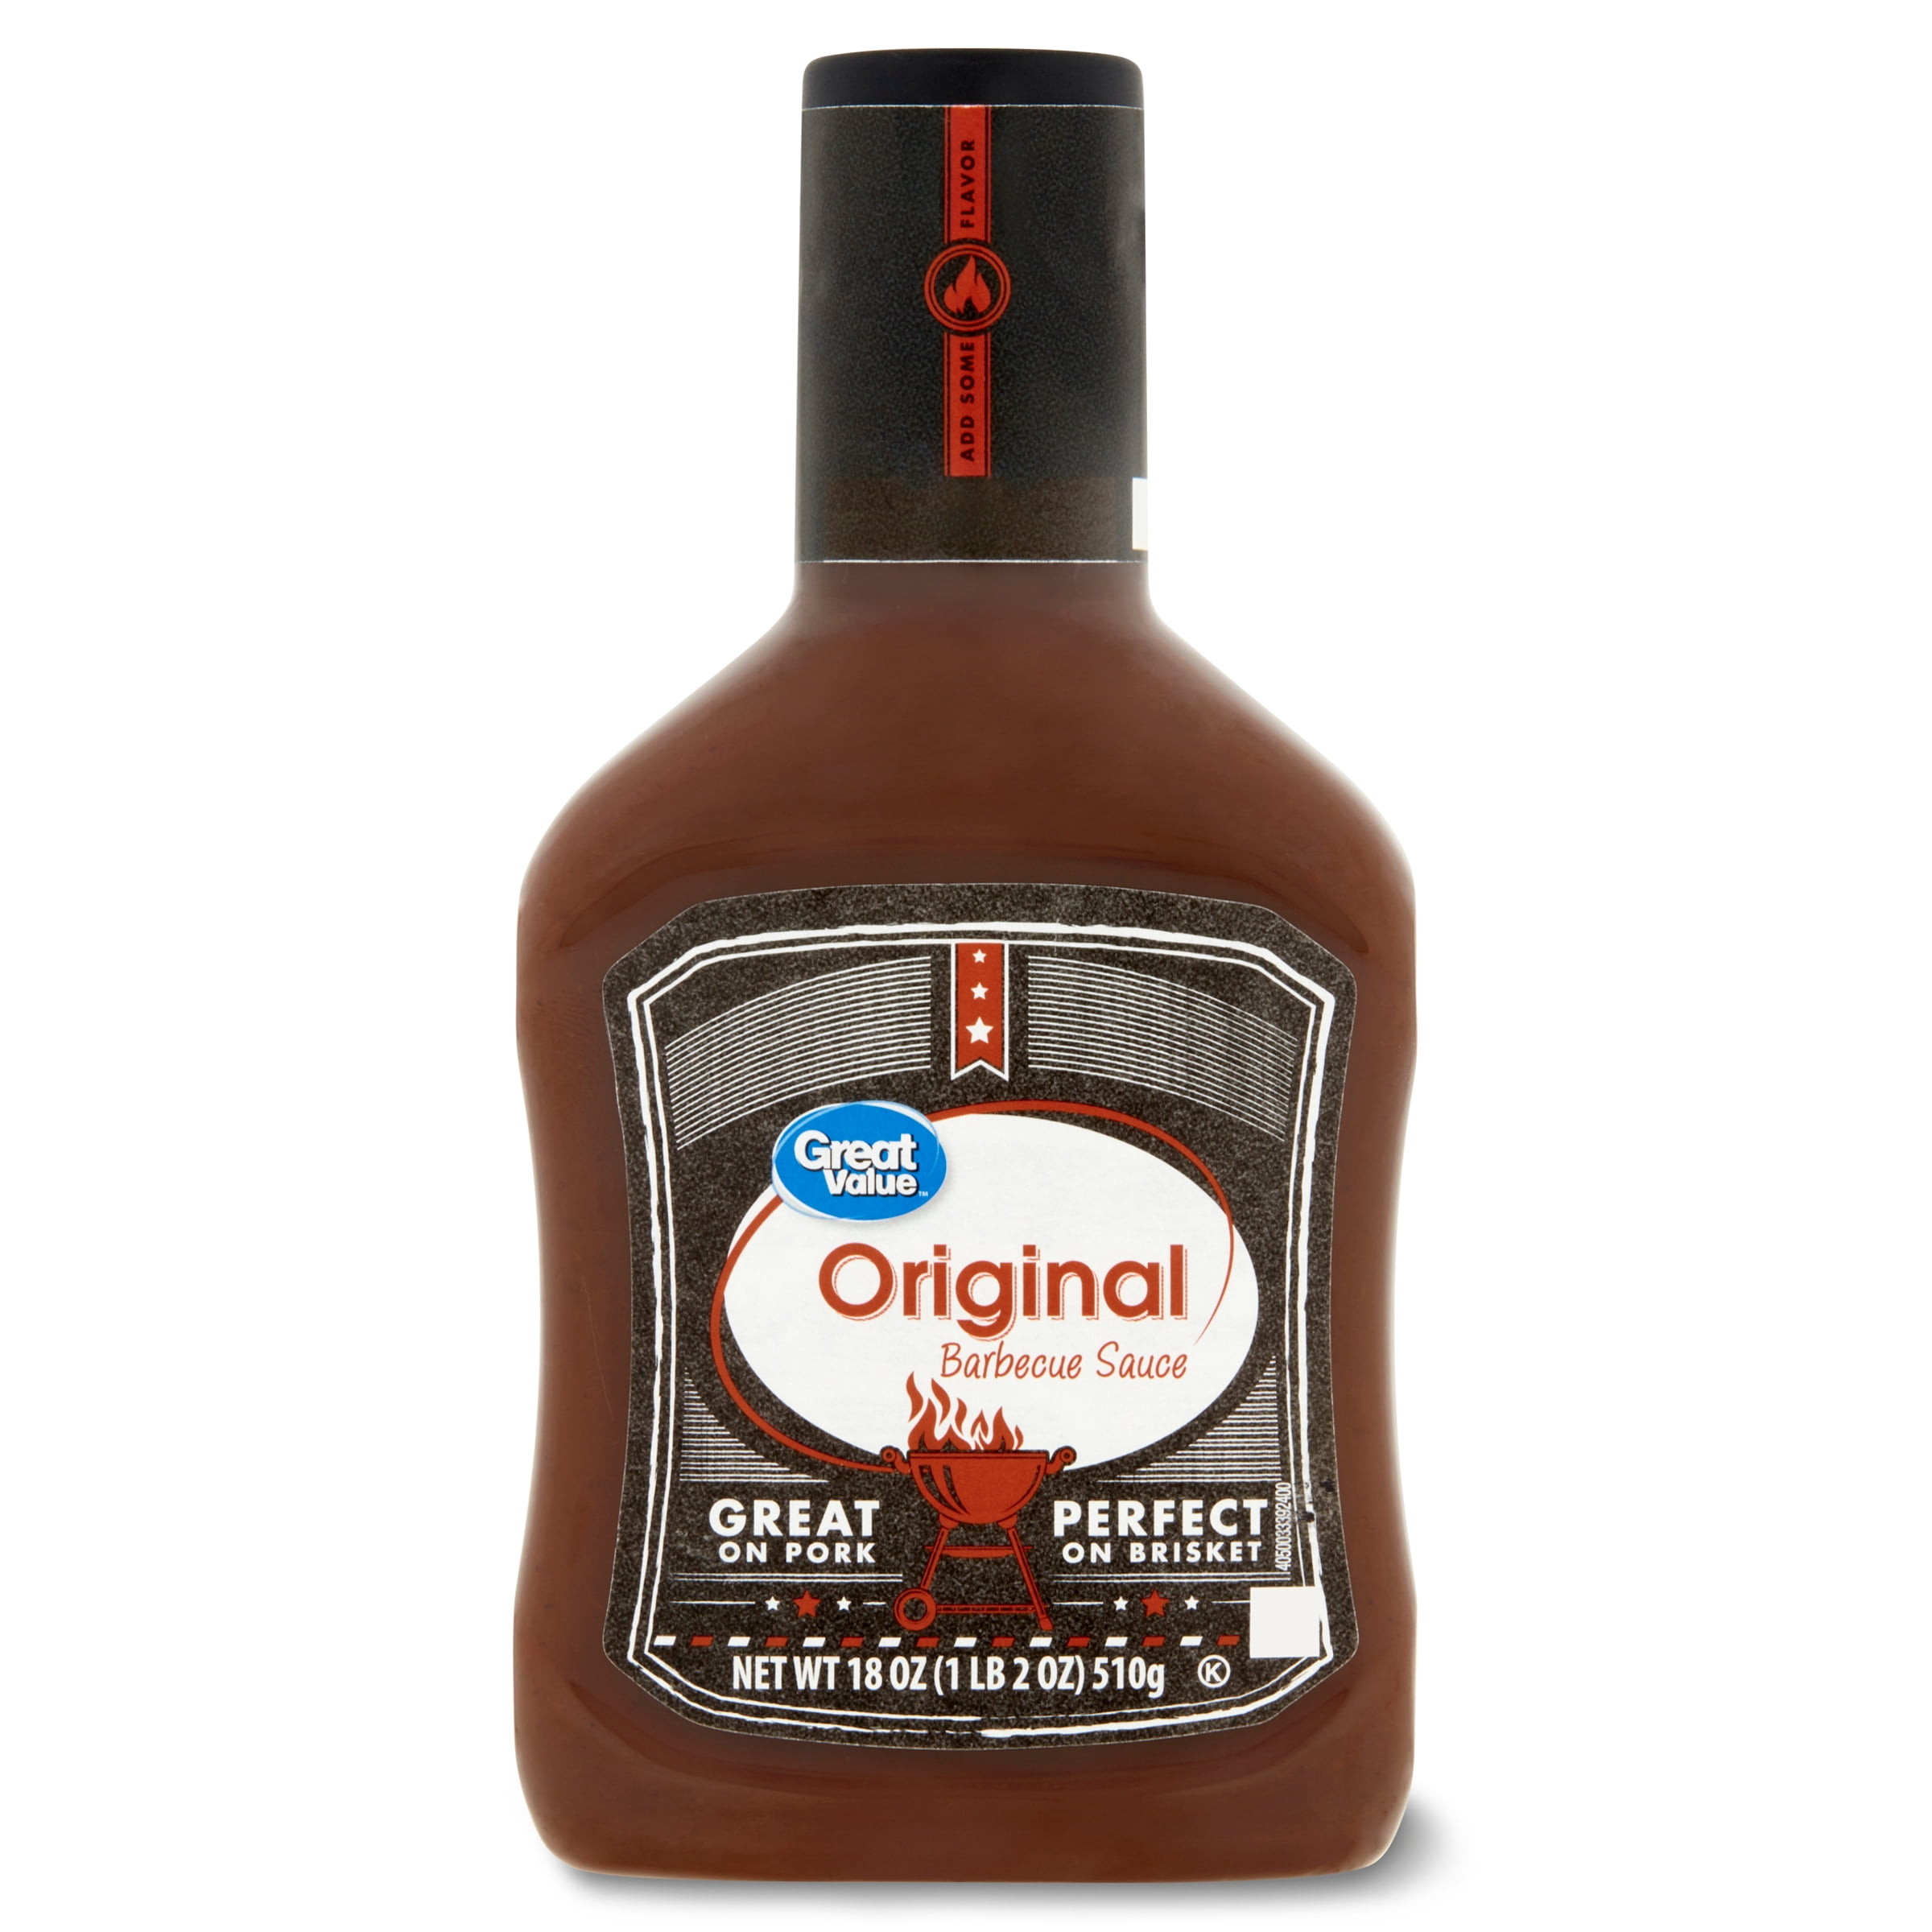 Discounted Barbecue Sauce Deals